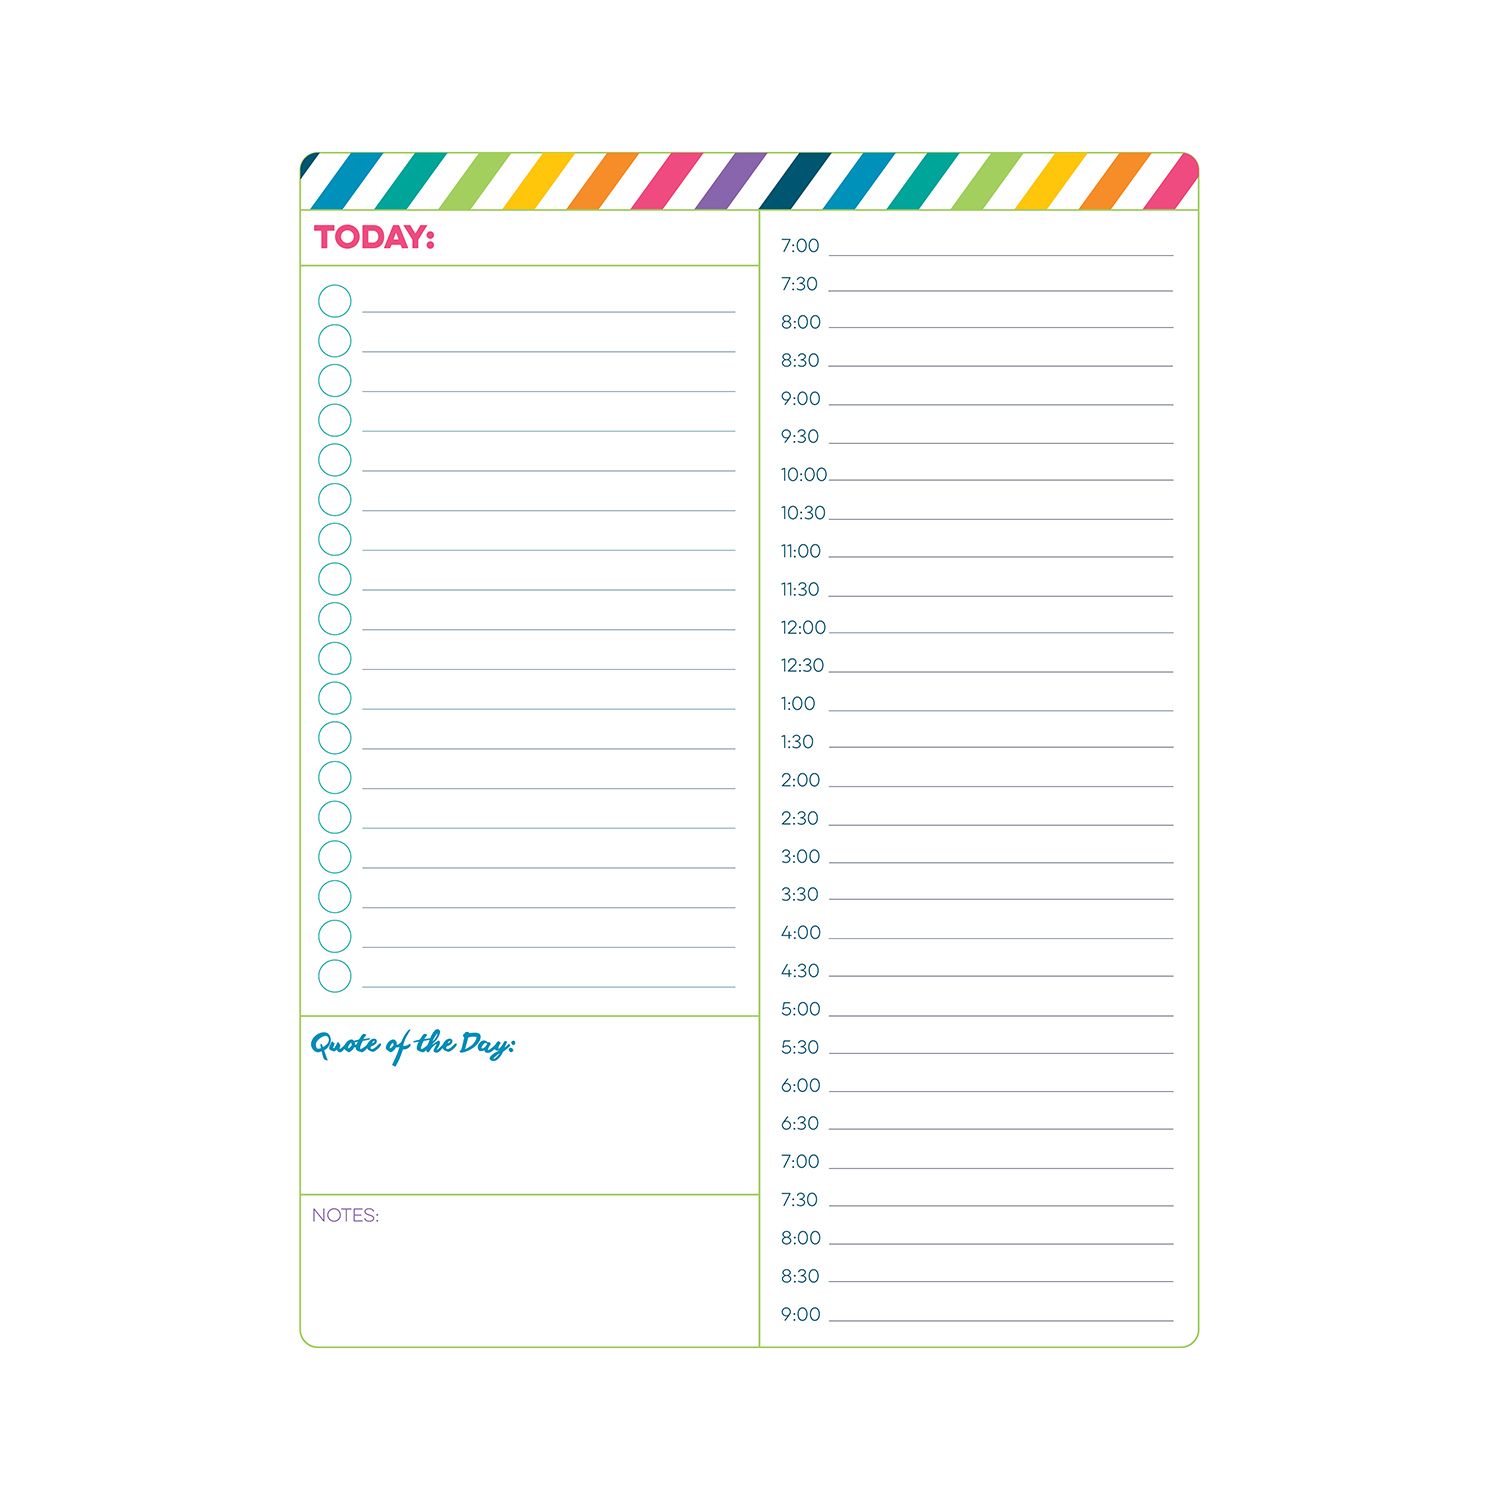 Printable Daily Schedule By Hour_81533